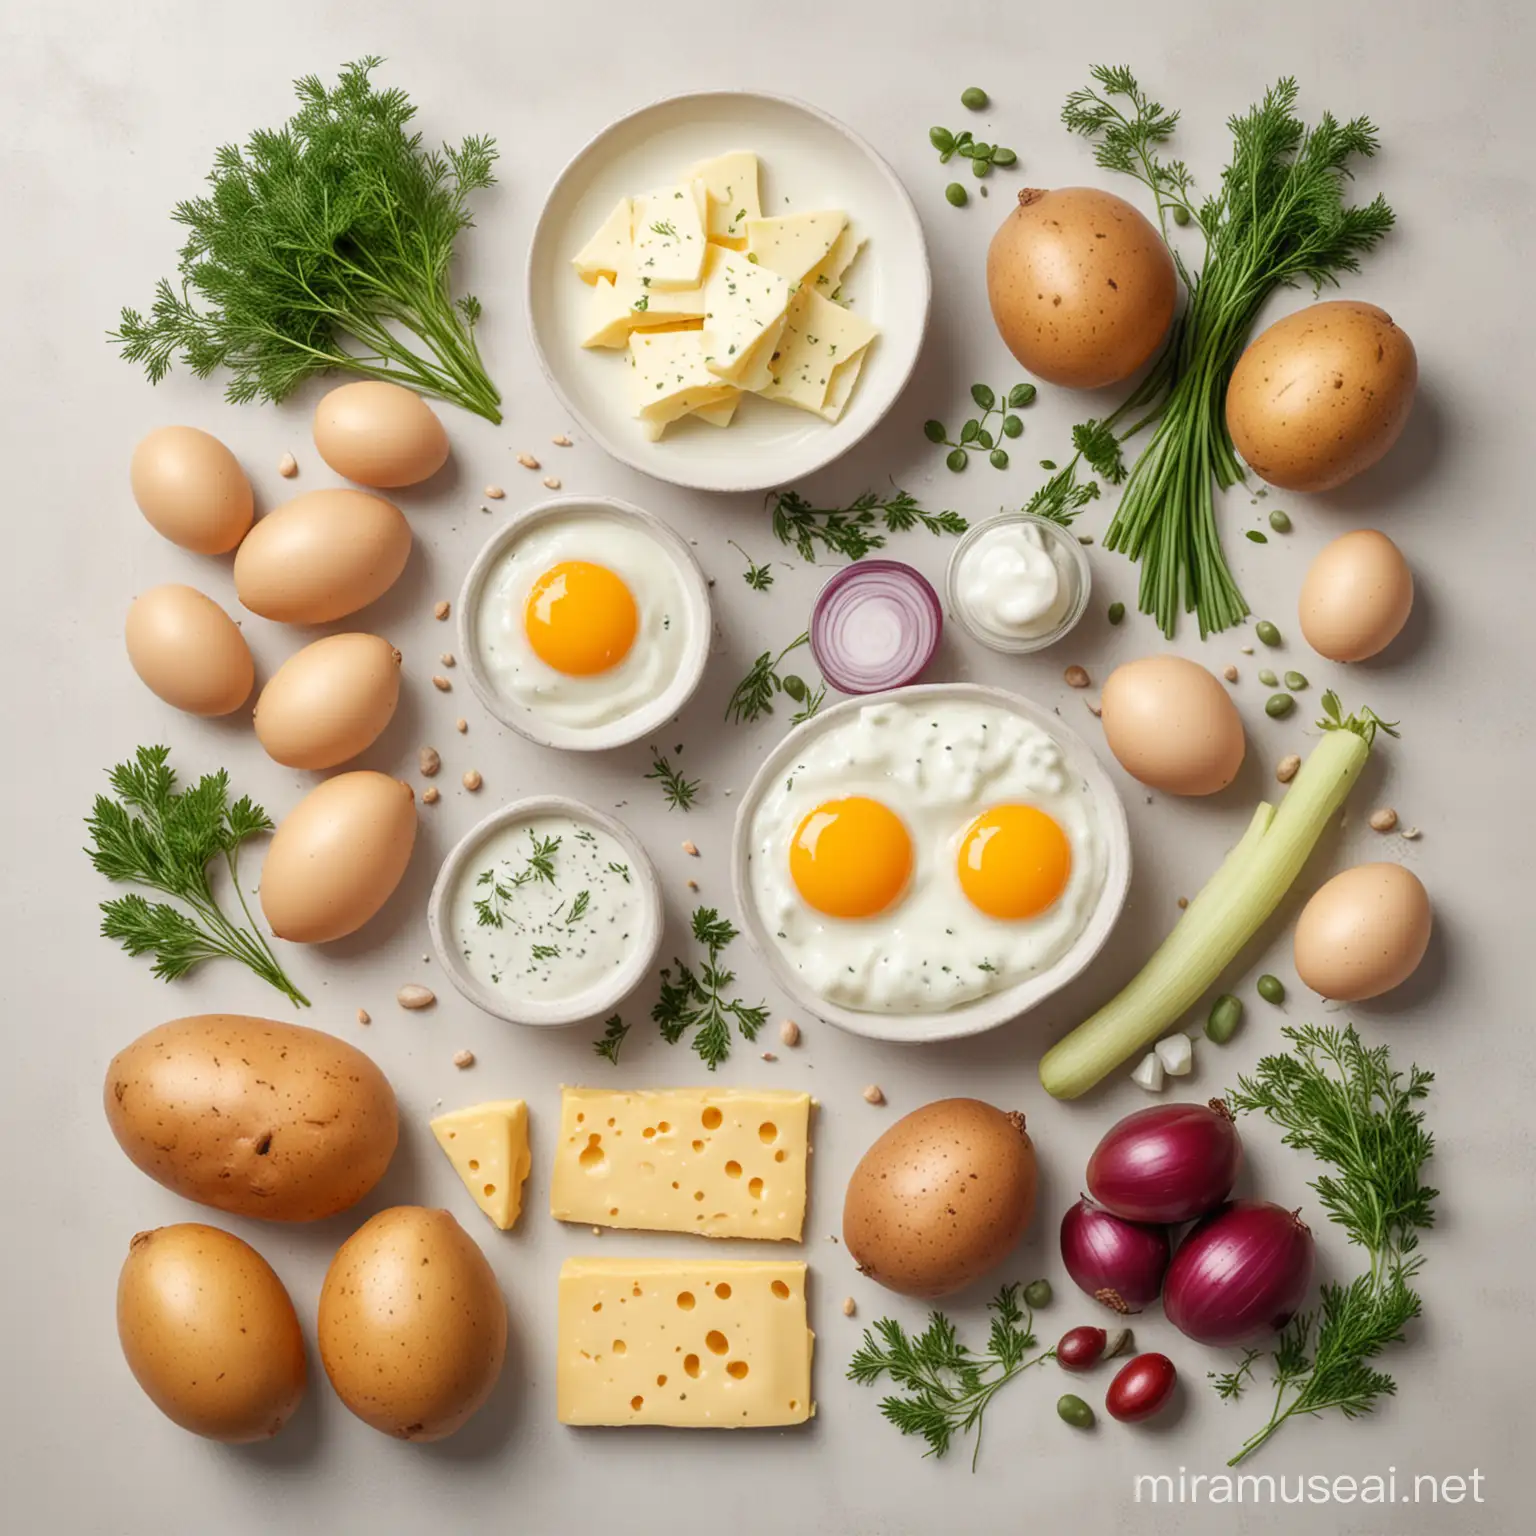 Fresh Ingredients Bean Onion Potato Milk Eggs Cheese Dill Parsley Olive Oil on Light Background